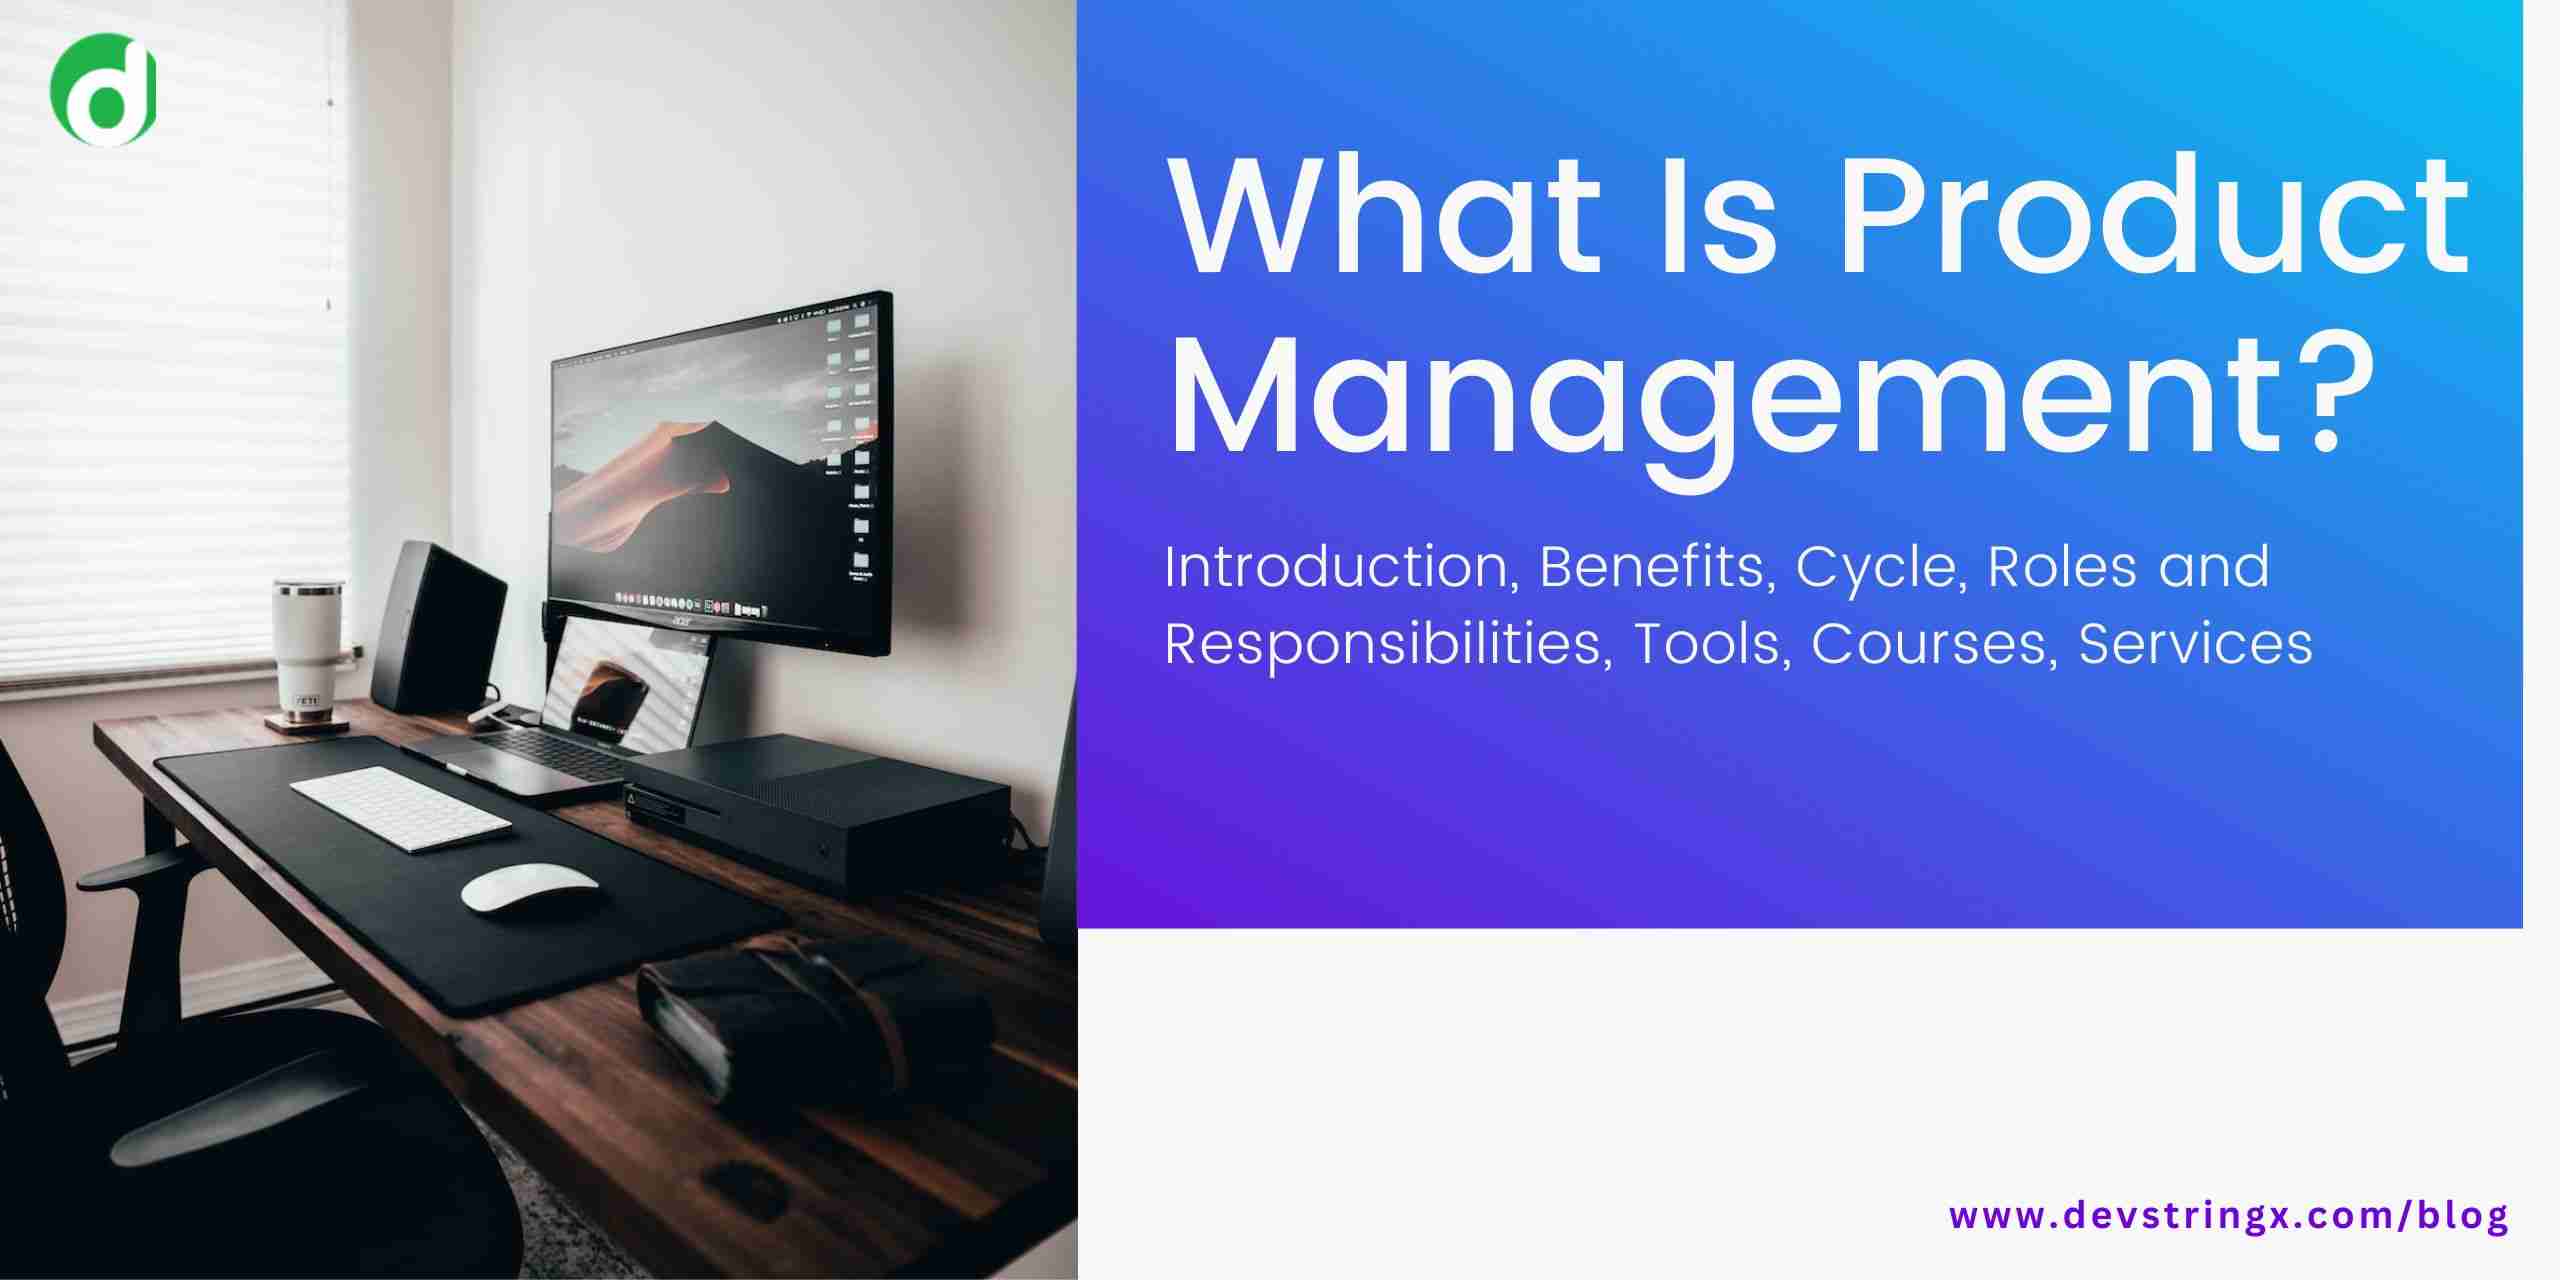 Feature image for product management blog